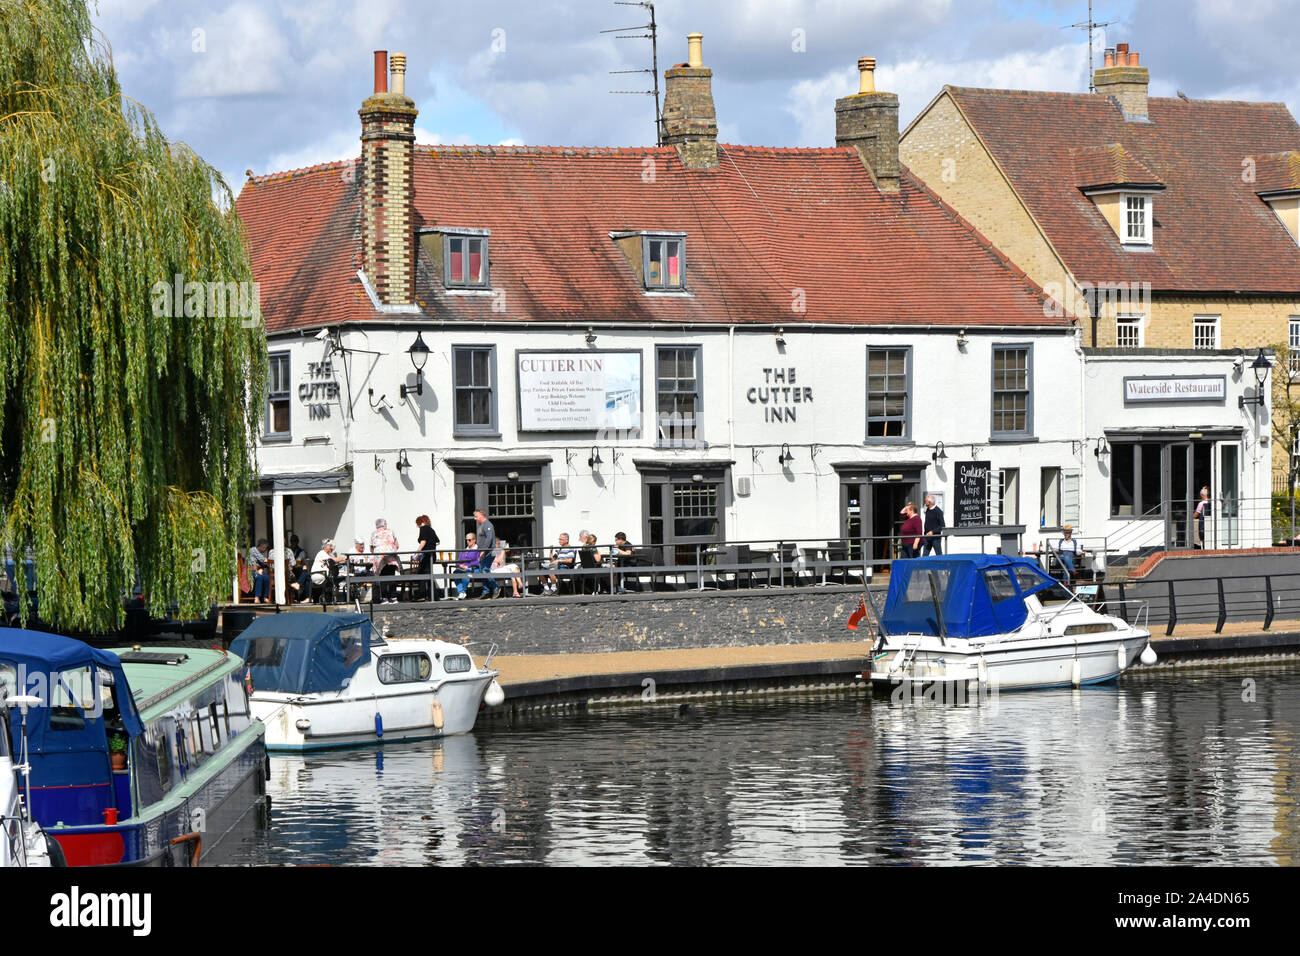 Lunchtime summer scene people outside The Cutter Inn pub & Waterside Restaurant river Great Ouse  boats beside towpath Ely Cambridgeshire England UK Stock Photo